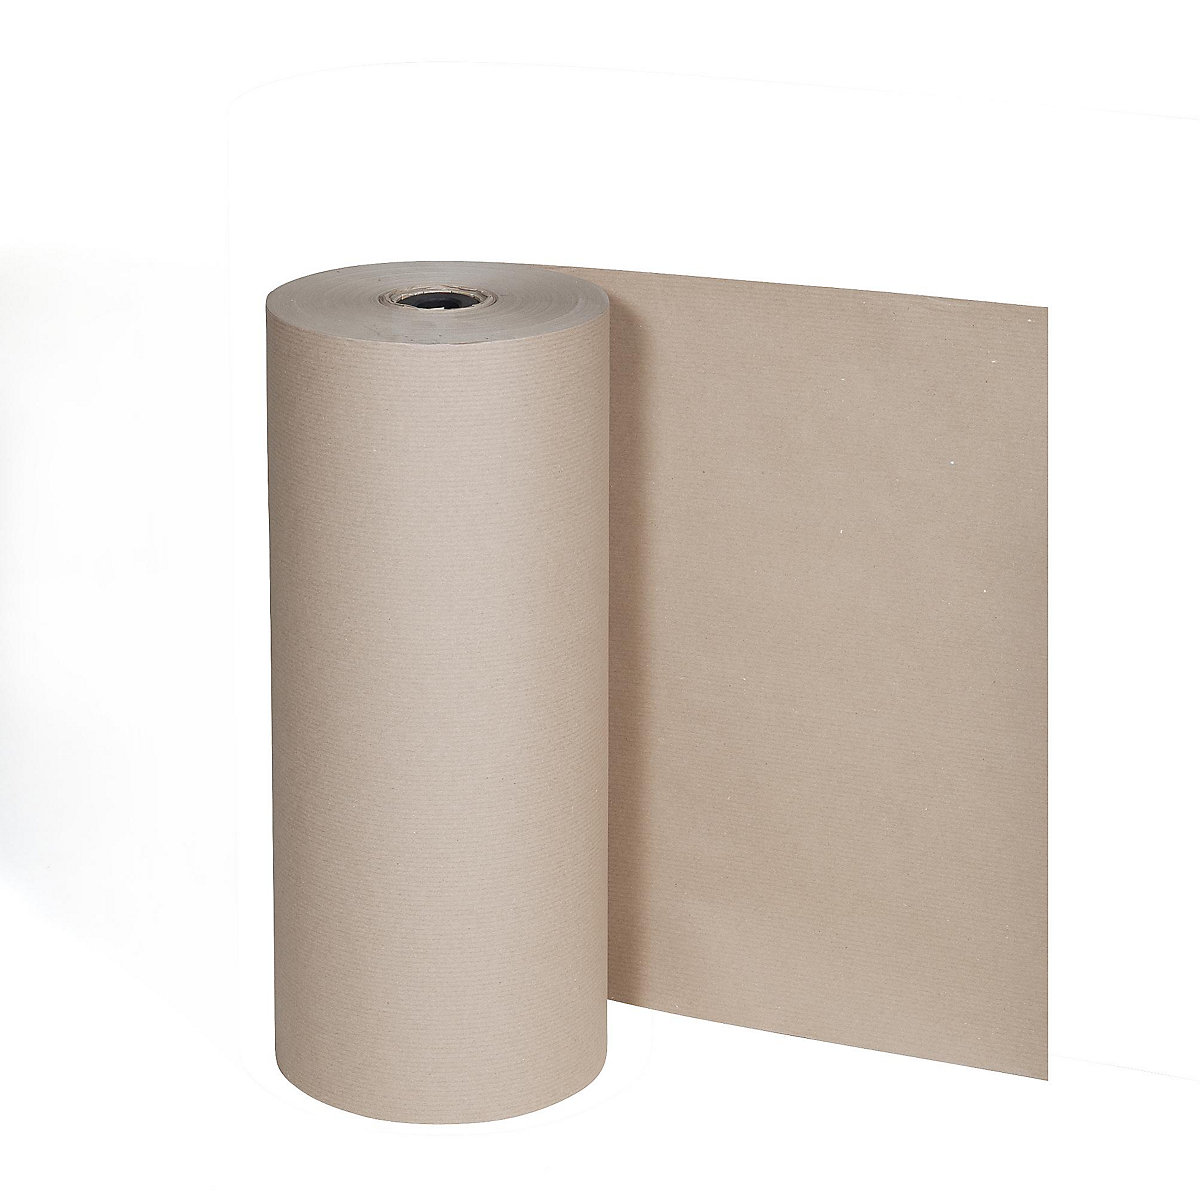 Packing paper, 80 g/m²: large roll for vertical stands